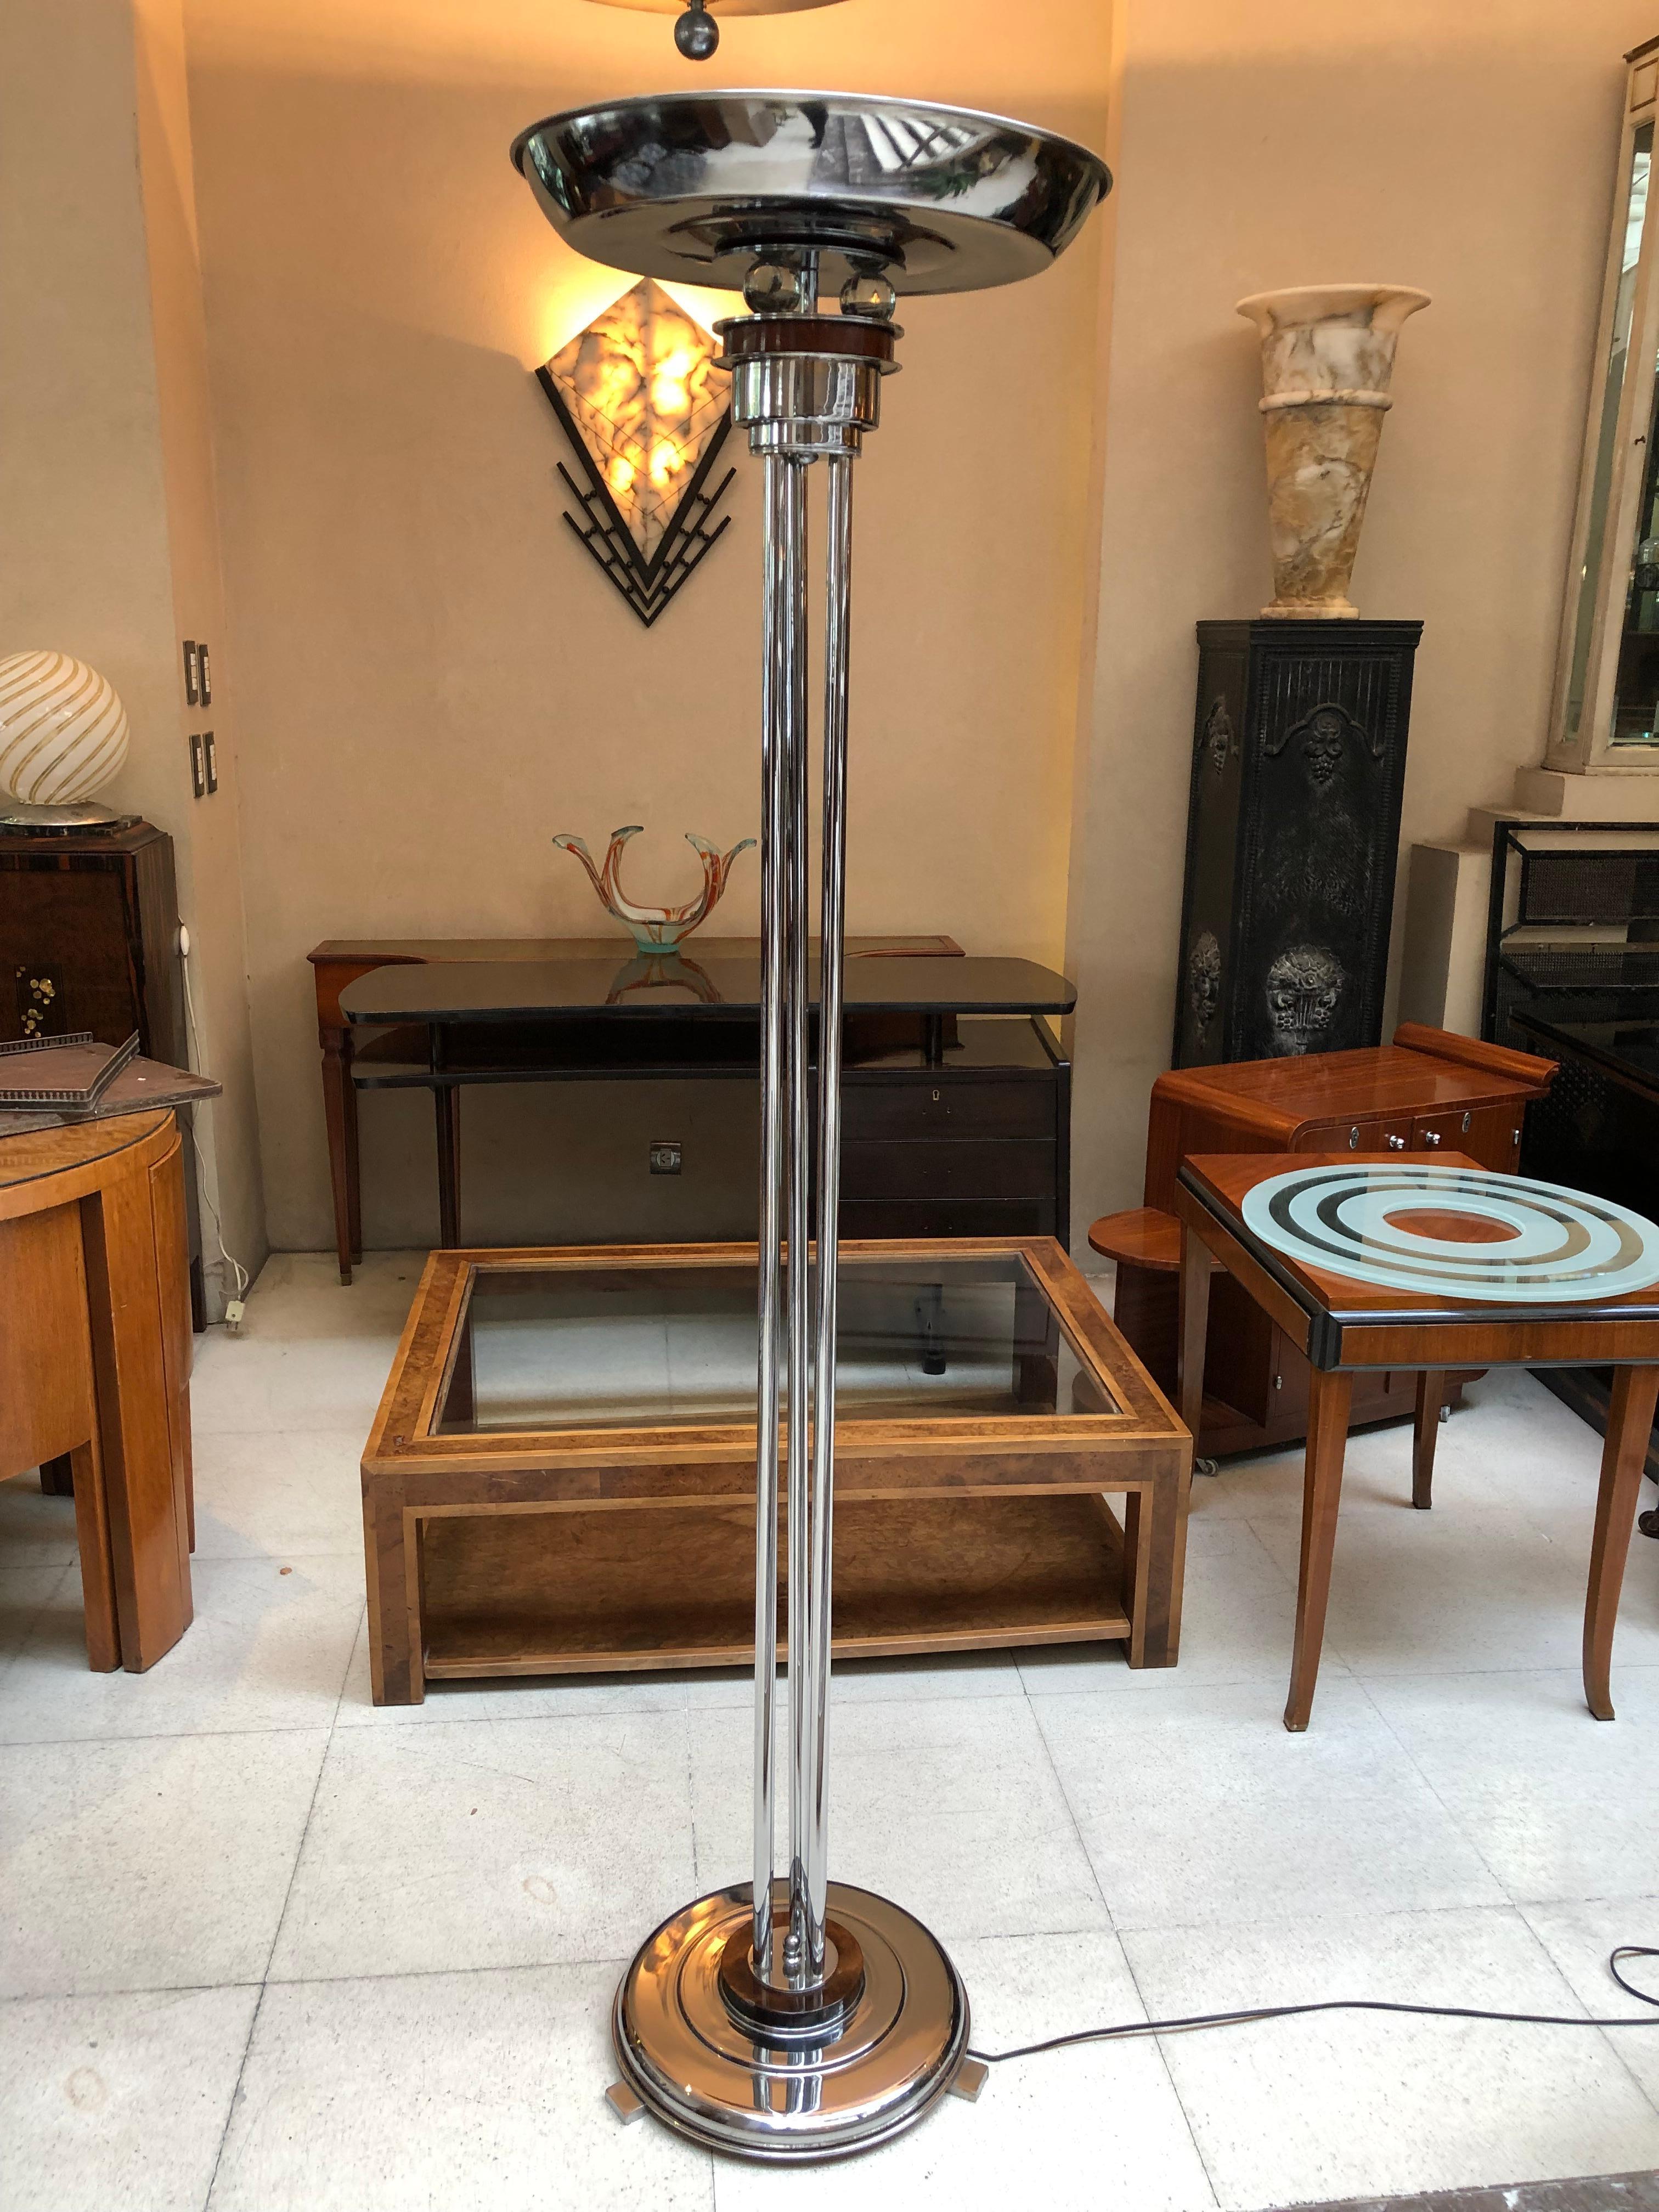 2 Floor lamps Art Deco
Materials: wood, glass, chrome
France
1930
You want to live in the golden years, those are the floor lamps that your project needs.
We have specialized in the sale of Art Deco and Art Nouveau styles since 1982.If you have any